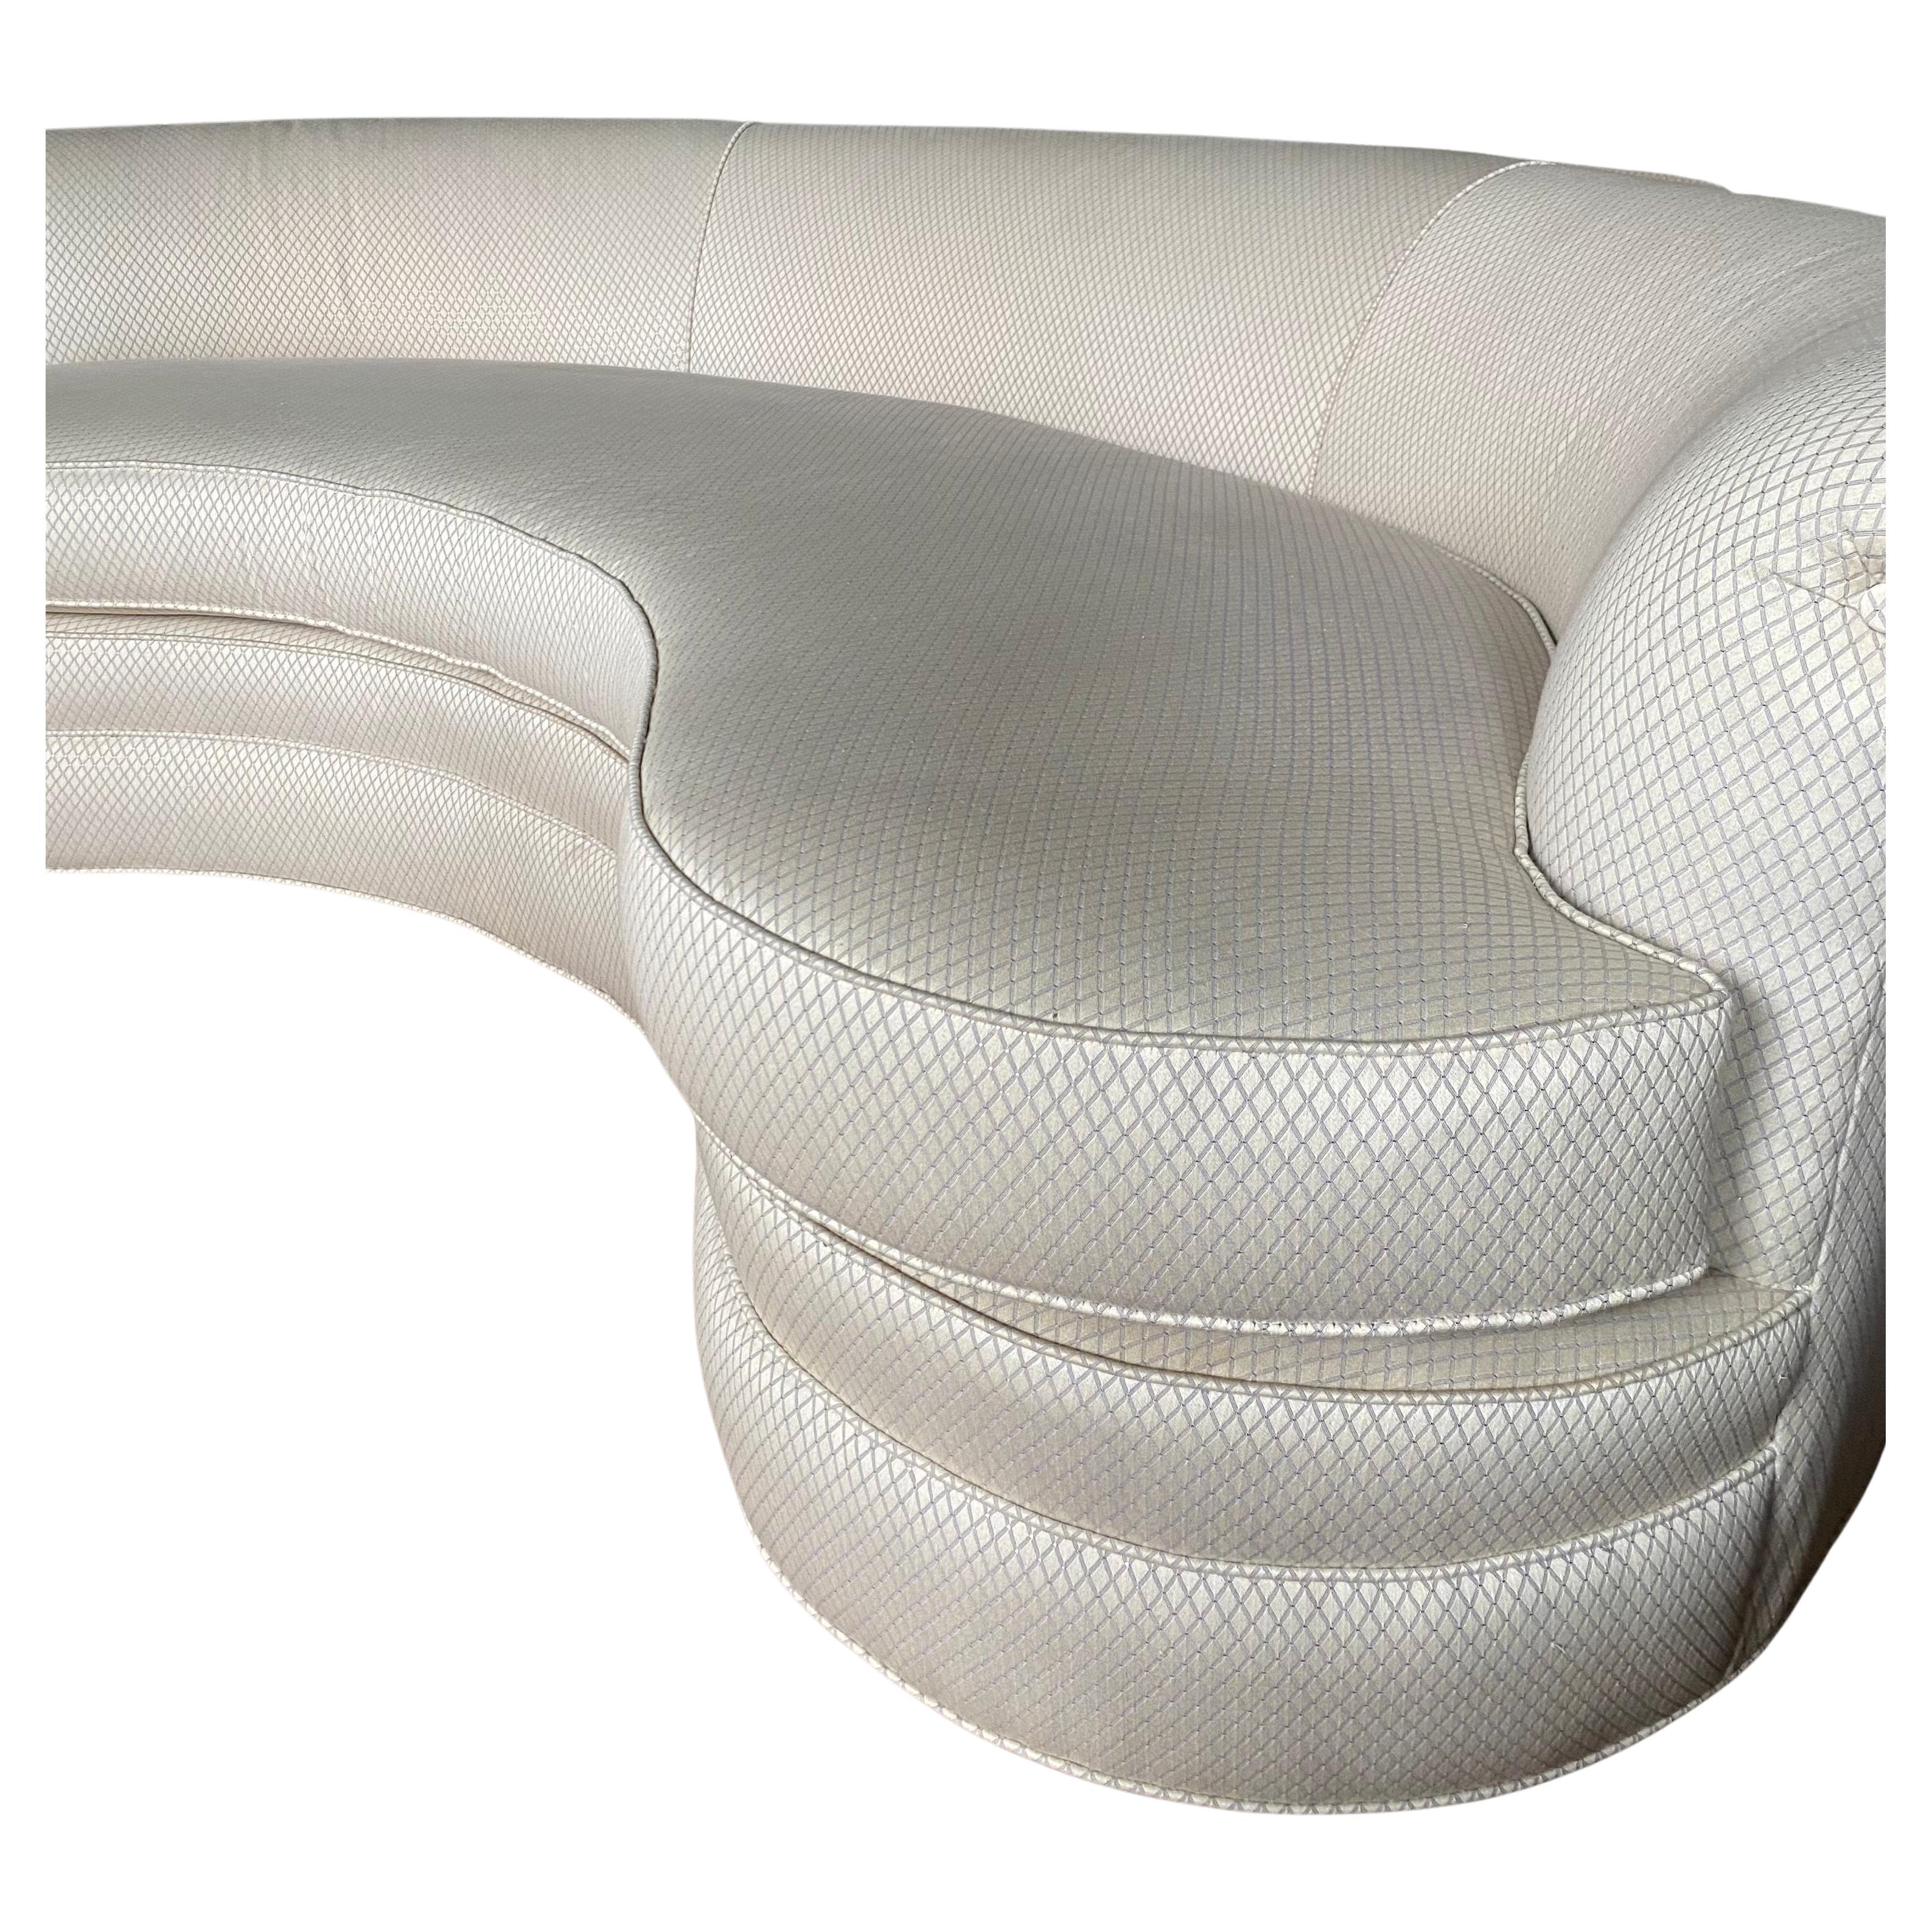 Mid-Century Modern Kidney Shaped Curved Serpentine Biomorphic Cloud Sofa For Sale 2